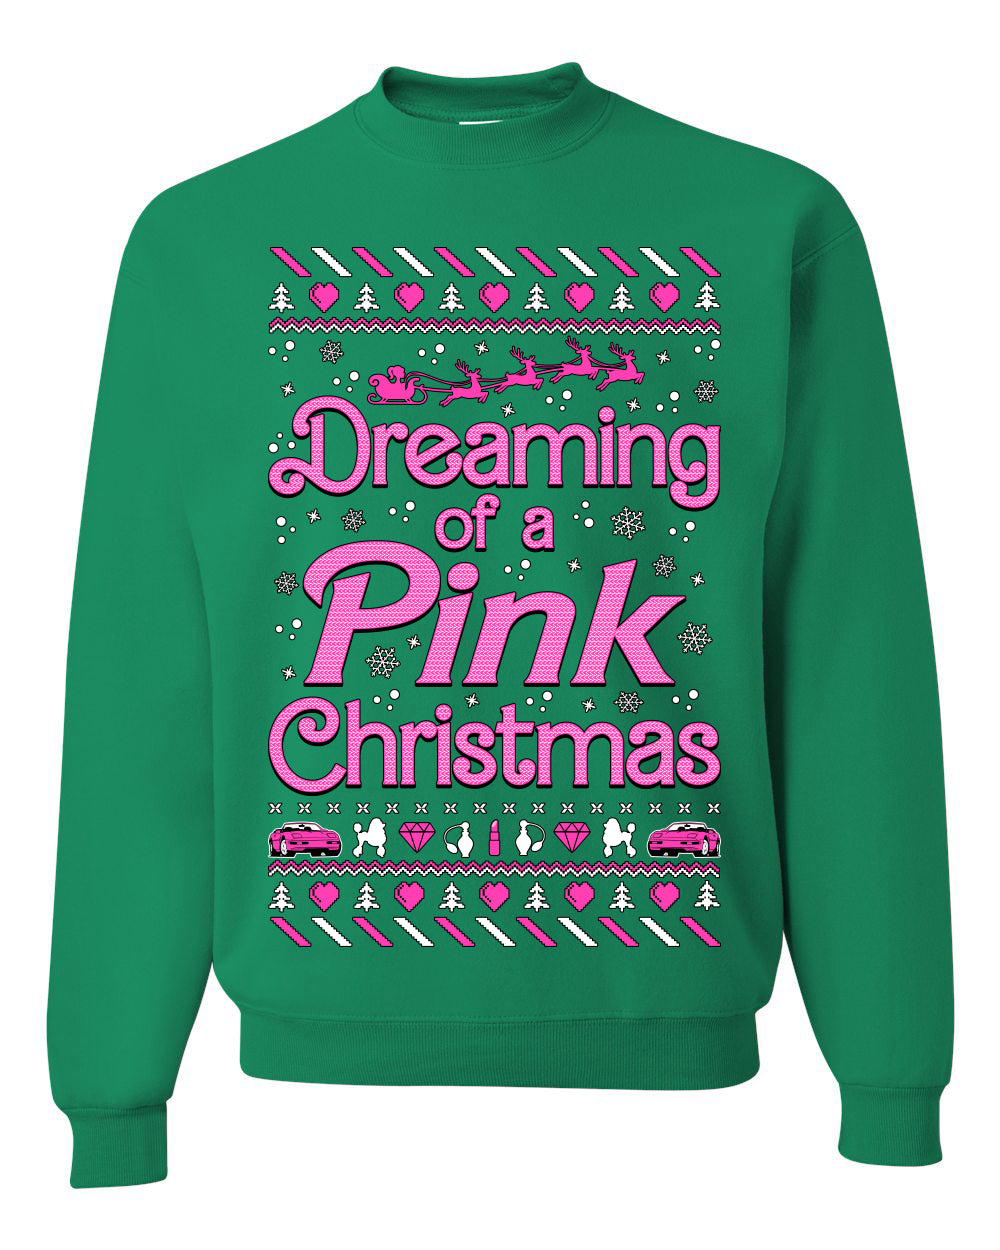 Dreaming Of A Pink Barbie Chirstmas Girly Woman Movie Party Ugly Christmas Sweater Unisex Crewneck Sweatshirt